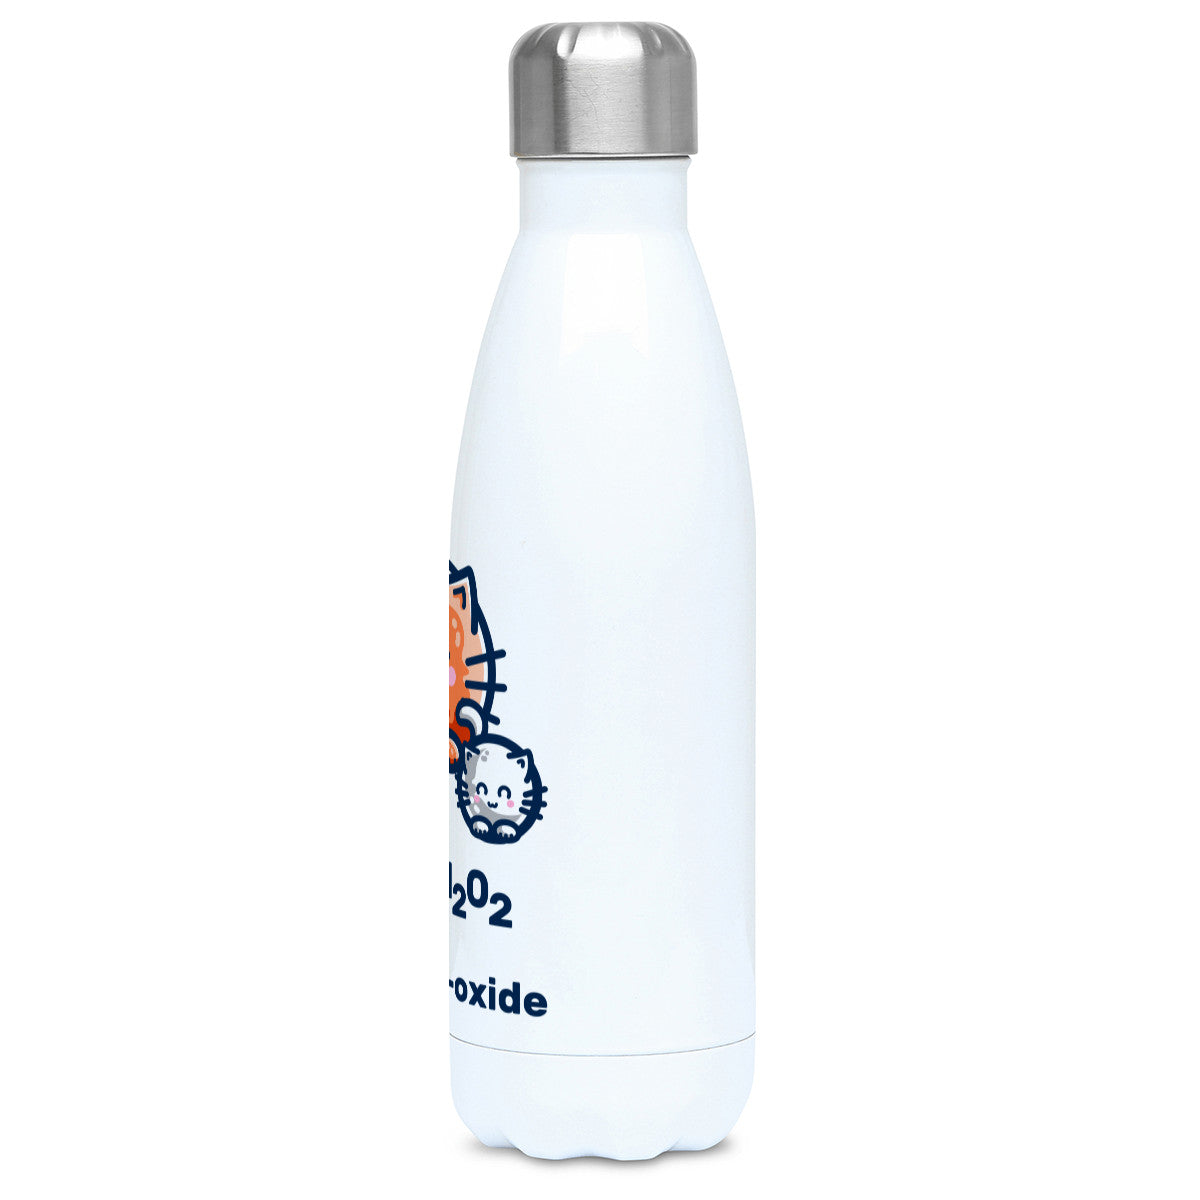 A tall white stainless steel drinks bottle seen side on with its silver lid on and the edge of the design showing